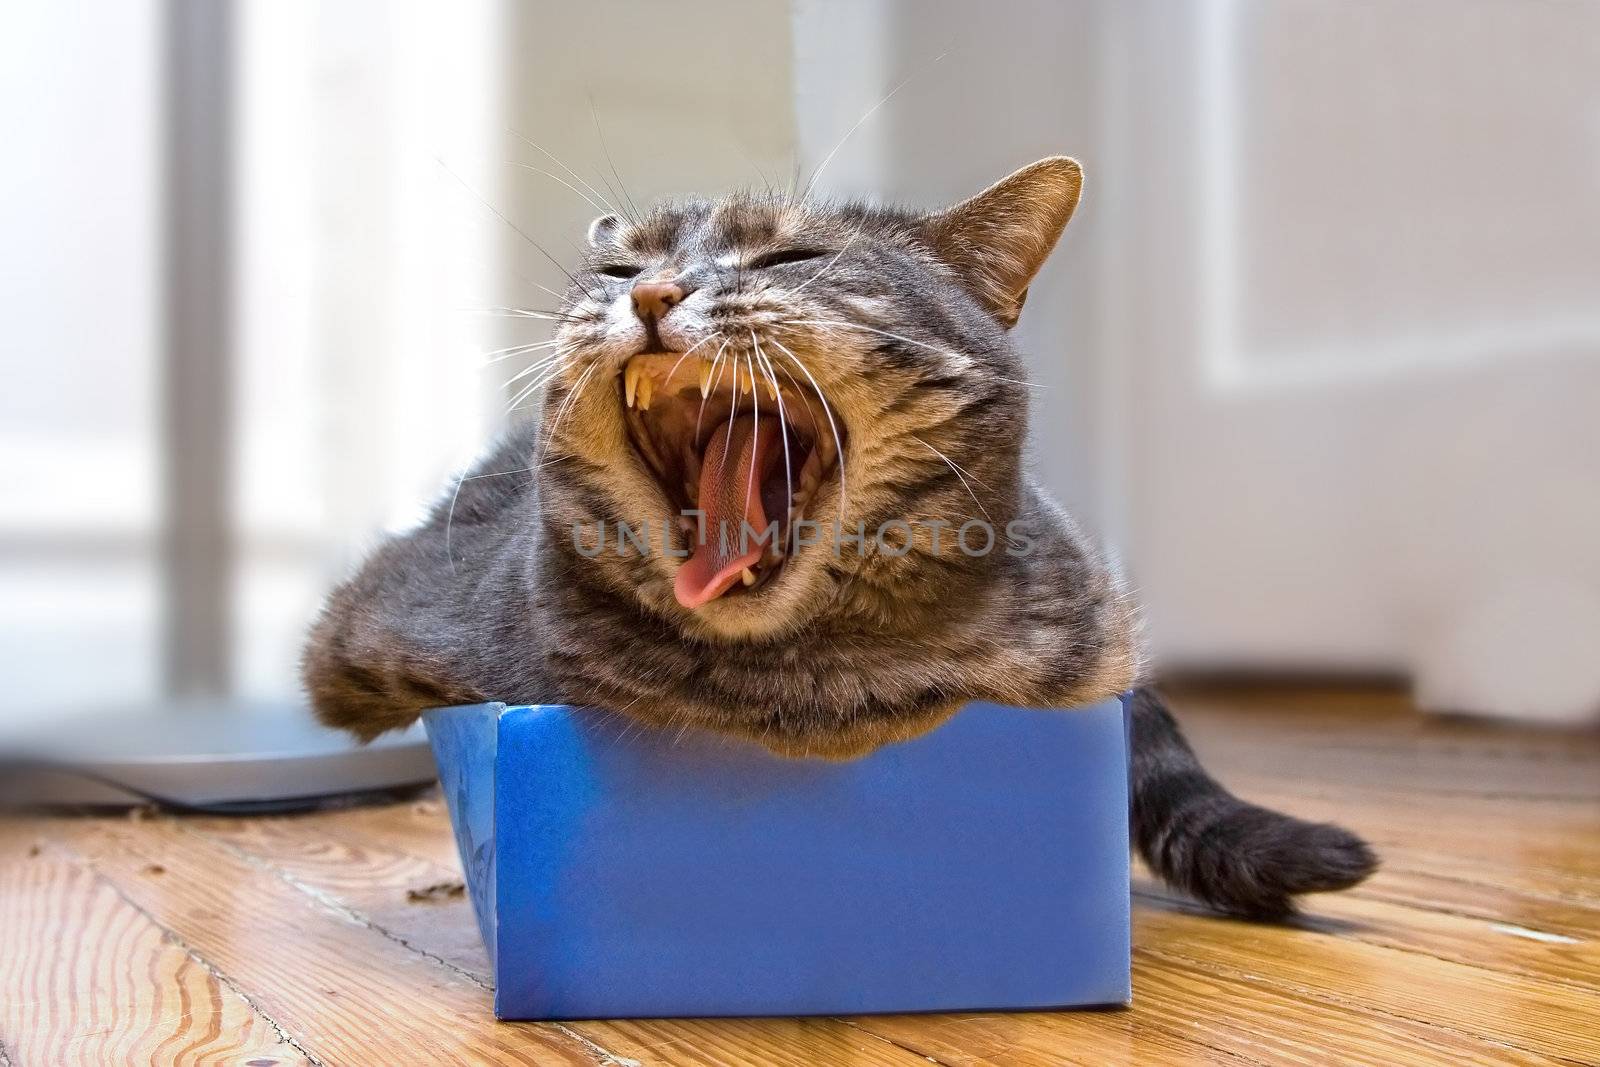 A cat laying in a shoe box whil she's yawning.